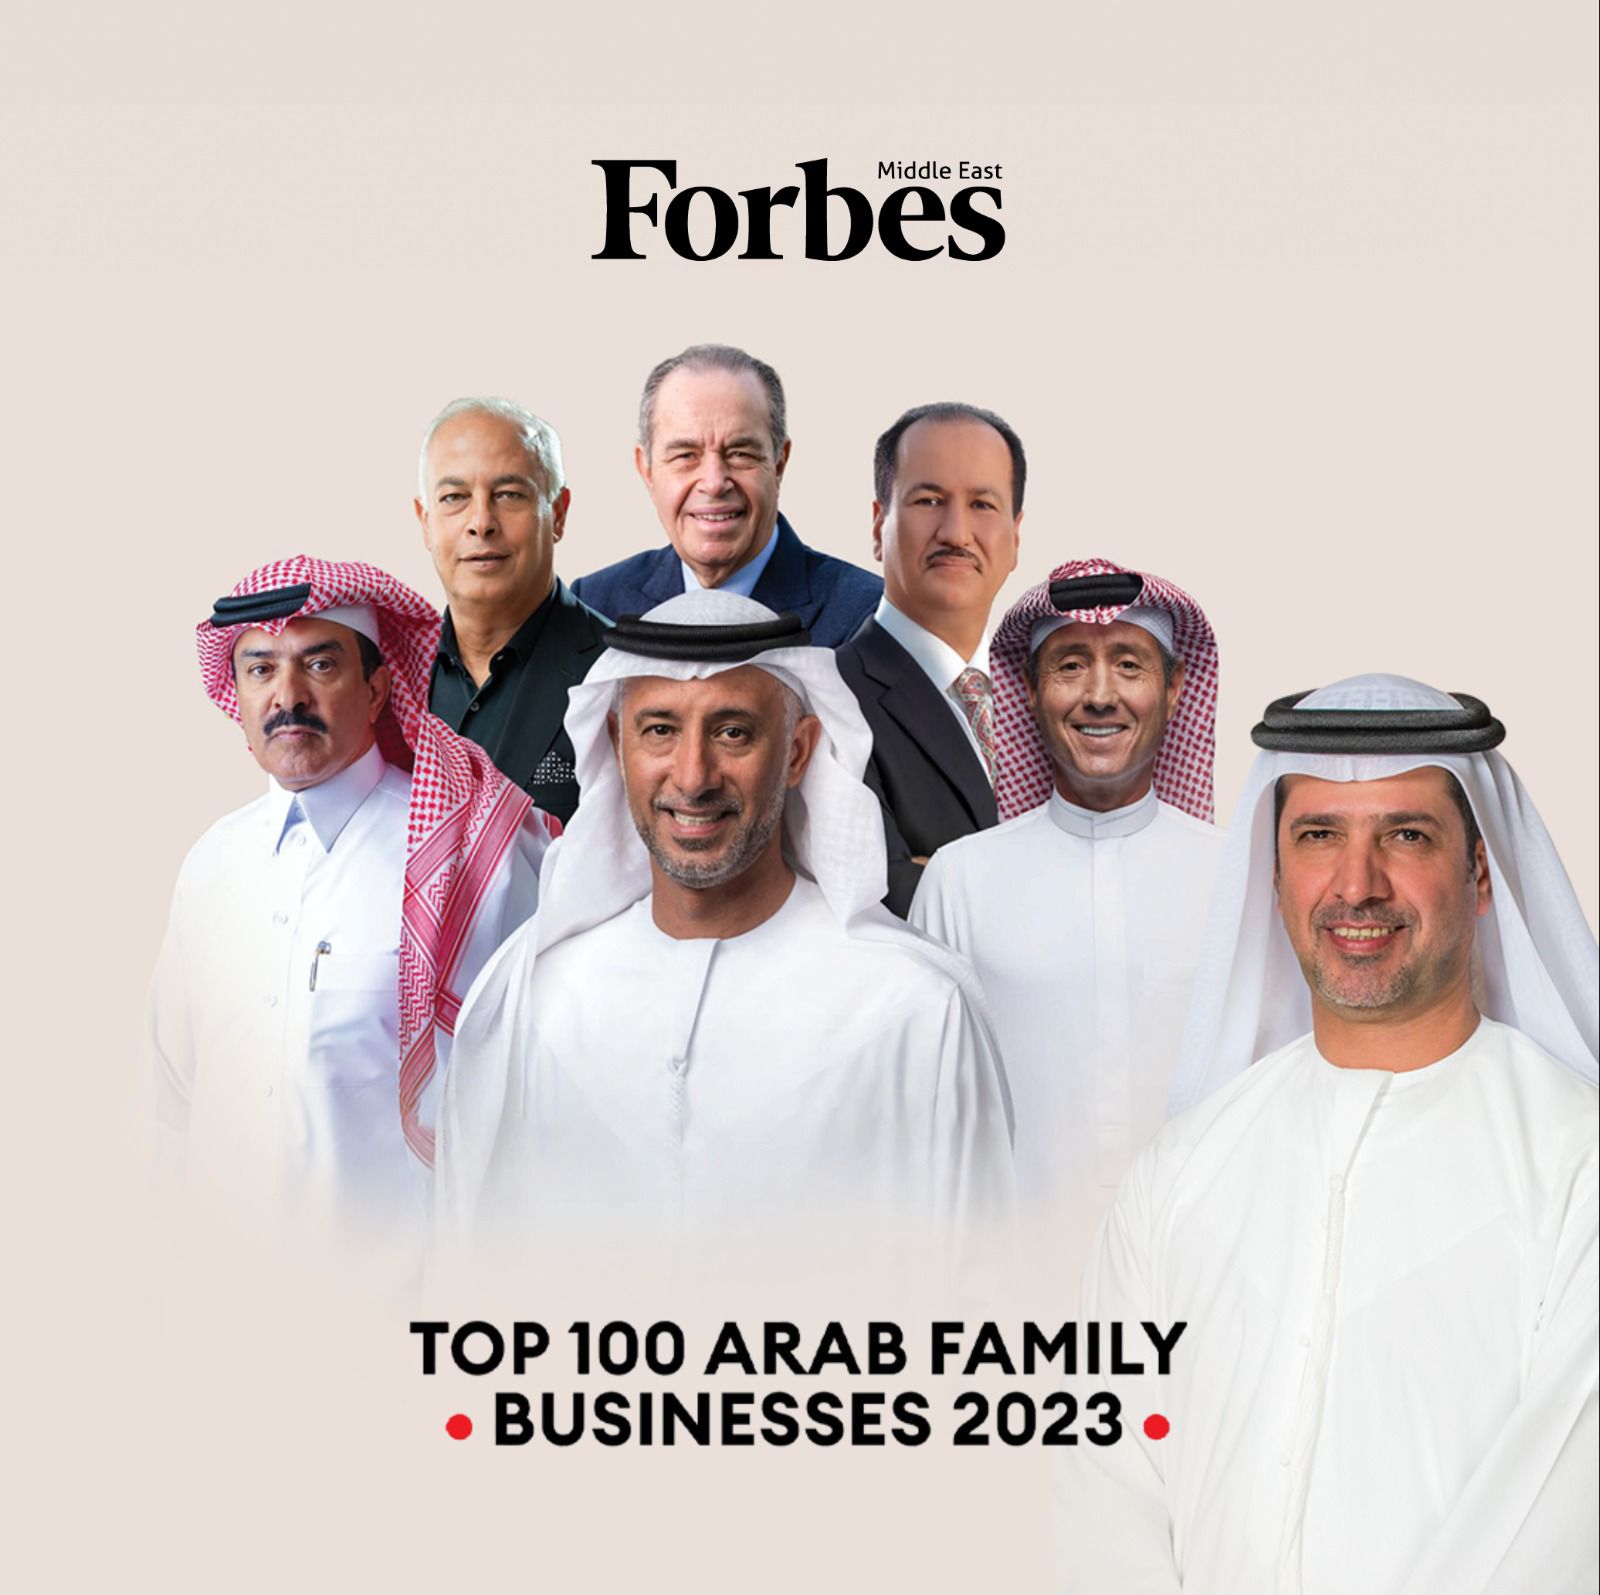 Al Masaood Recognized as one of the Top Arab Family Business in the Middle East by Forbes Middle East for the Third Consecutive Year